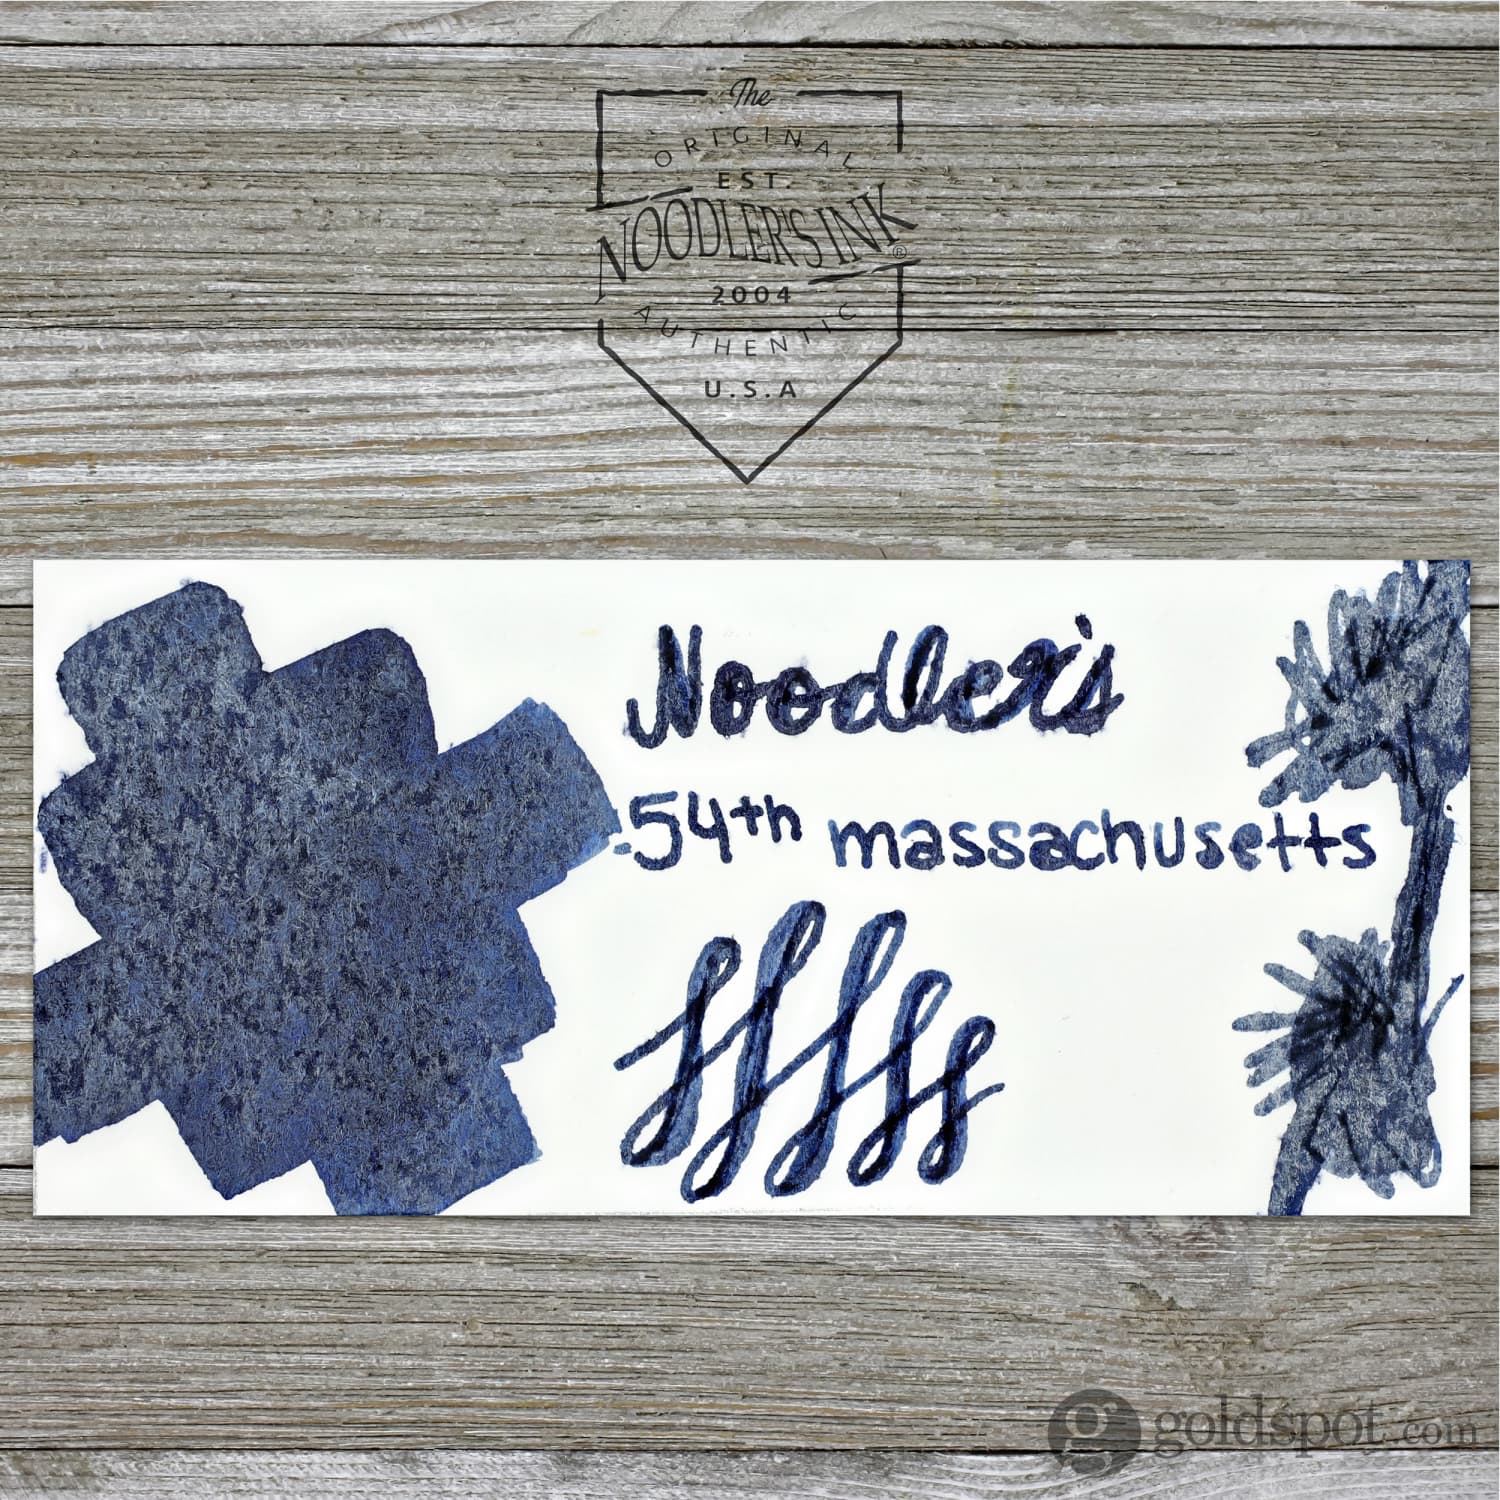 Ink Review: Noodler's 54th Massachusetts - Seize the Dave